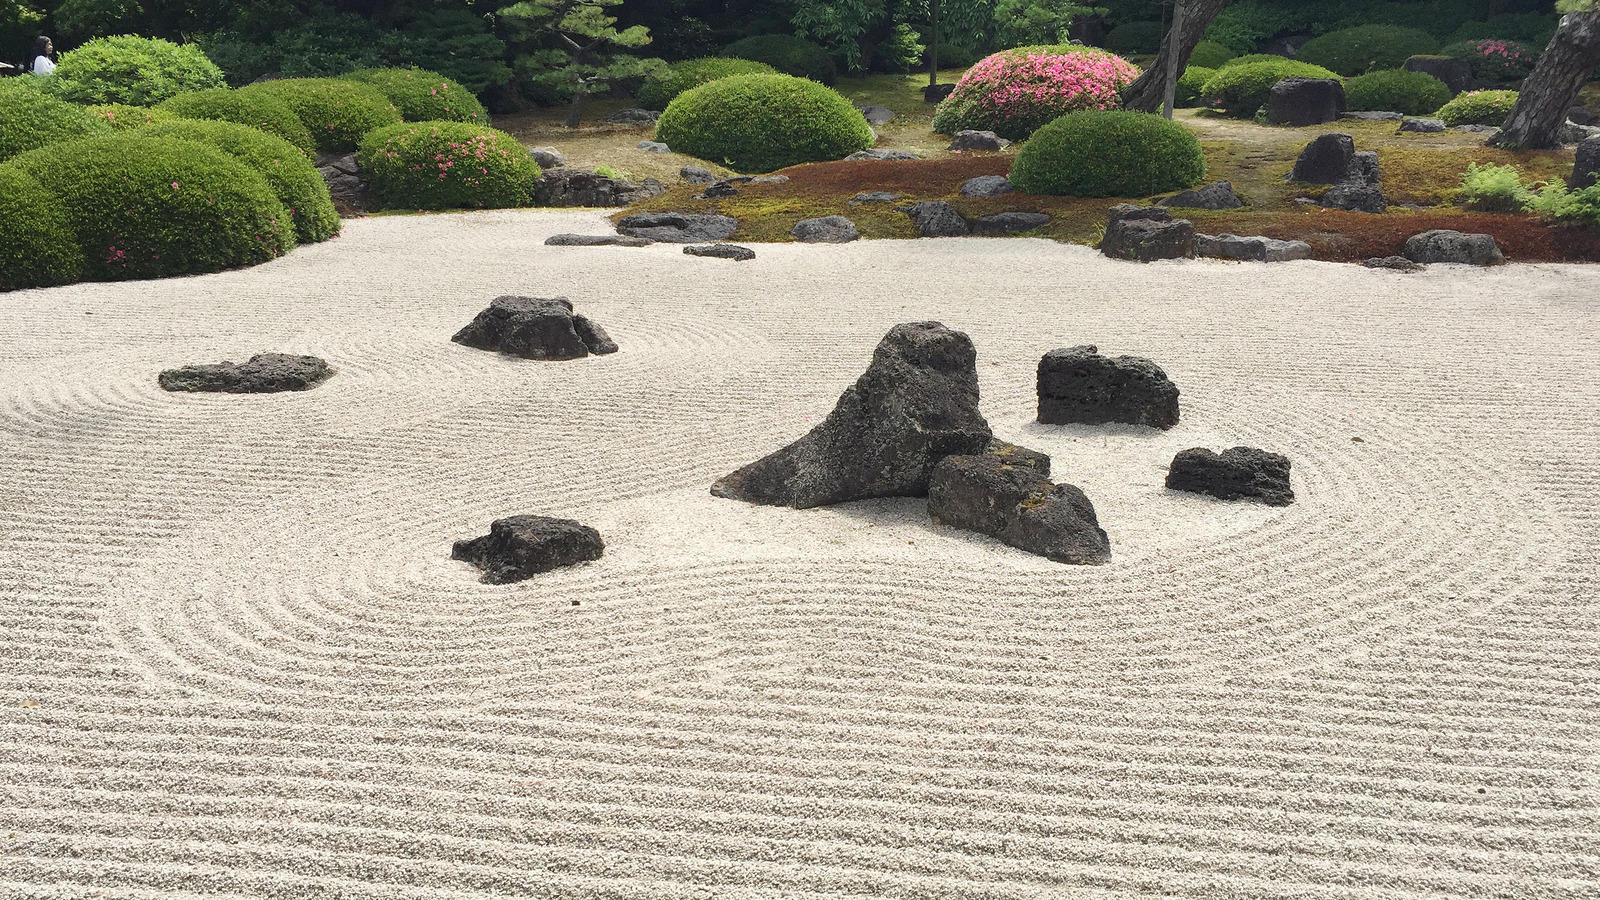 The meaning behind the Japanese Zen garden